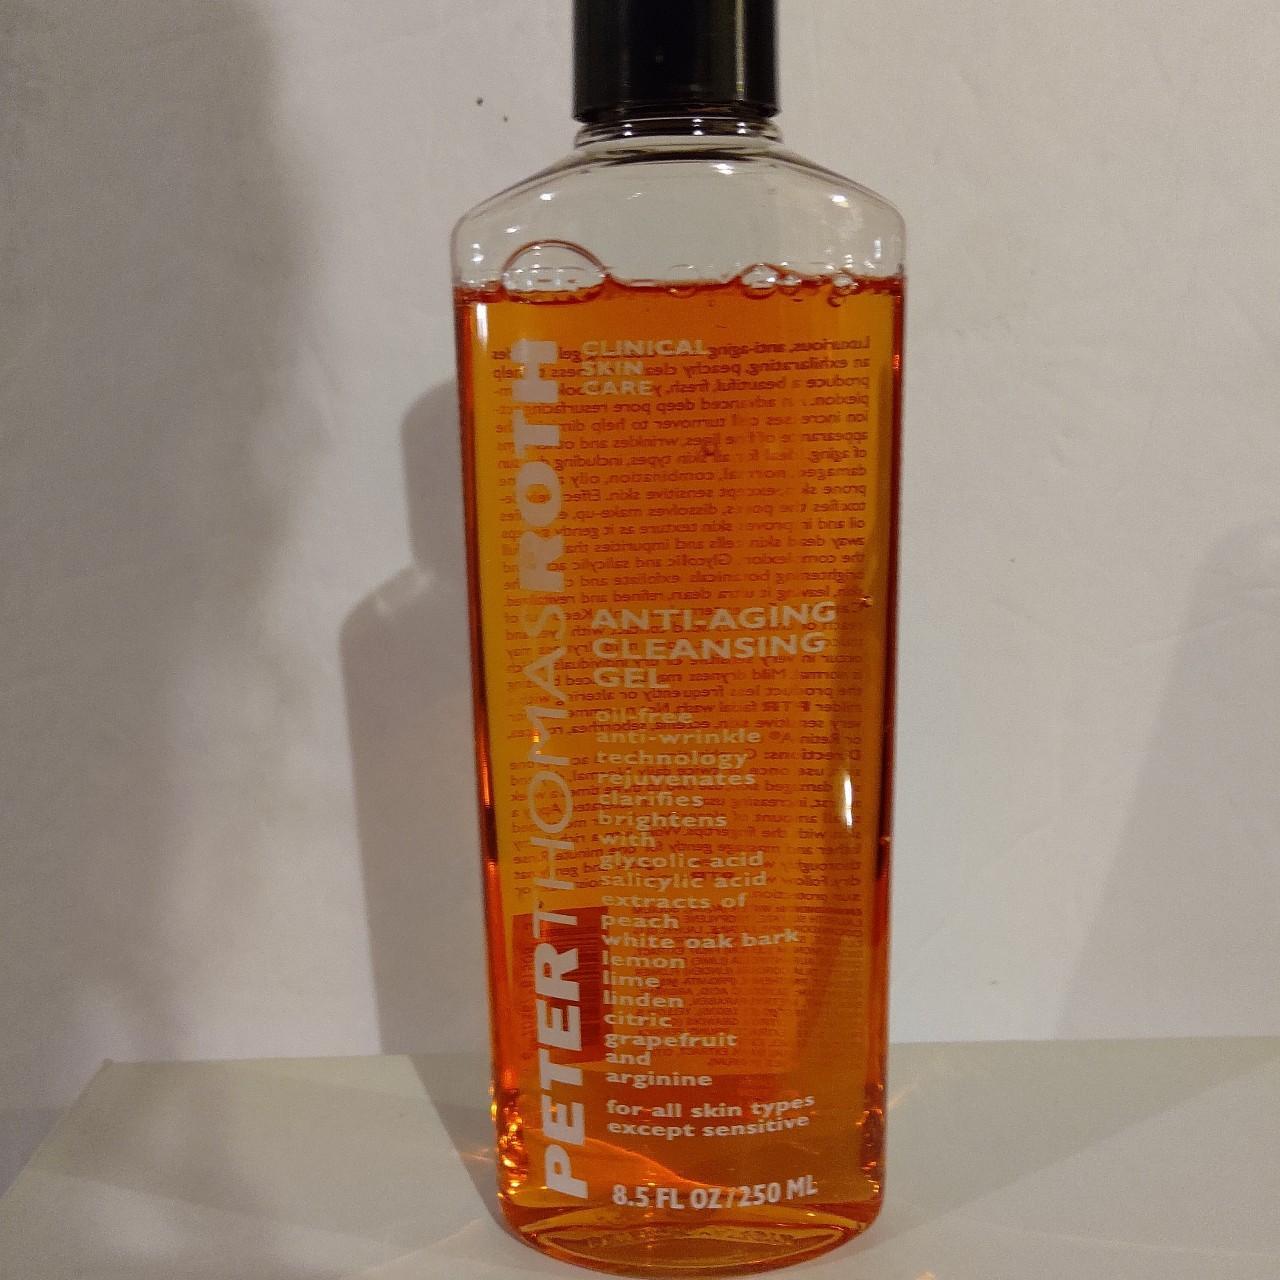 Product Image 4 - Peter Thomas Roth Anti-Aging Cleansing